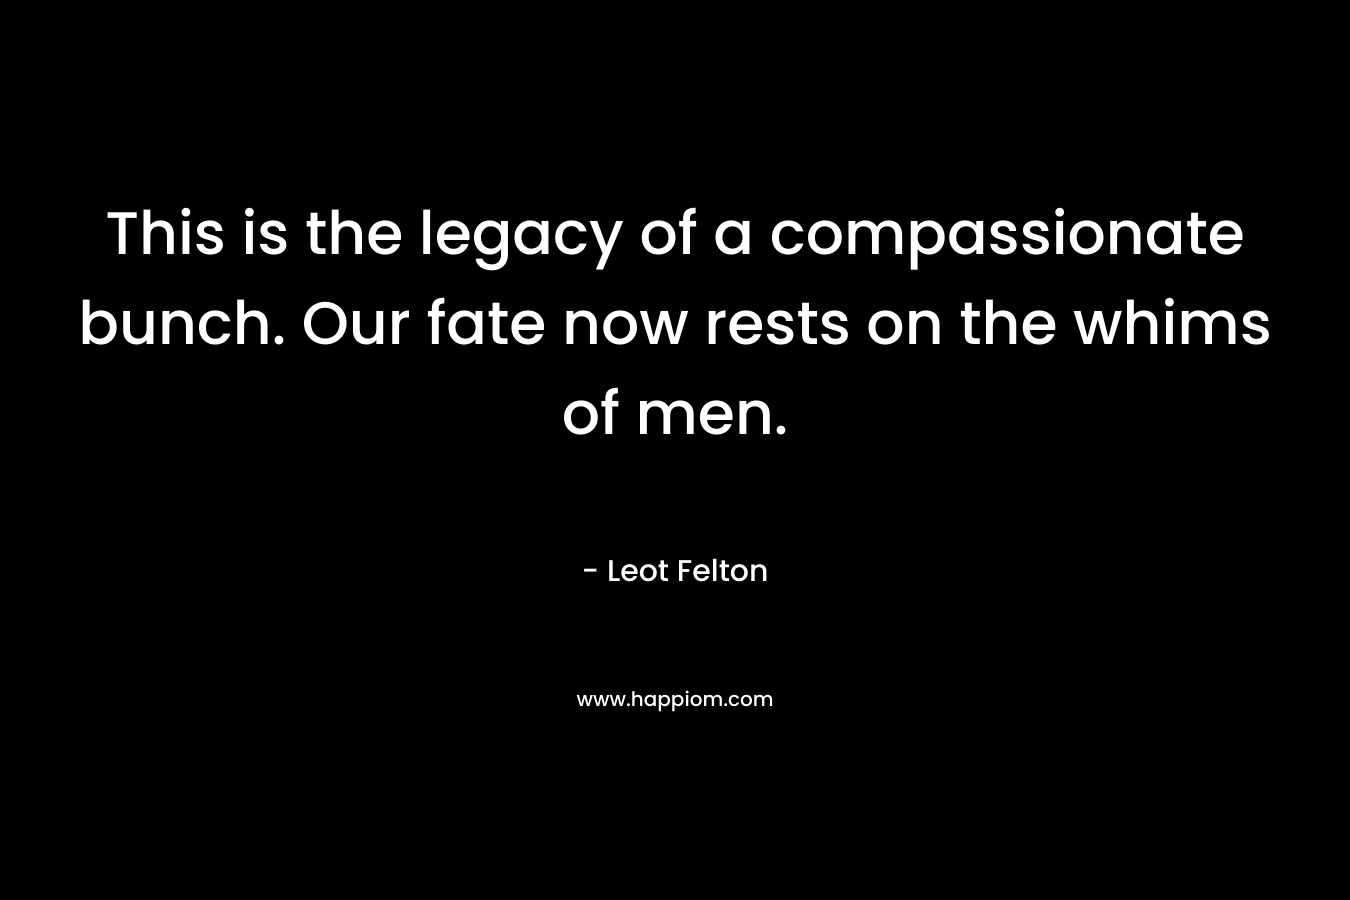 This is the legacy of a compassionate bunch. Our fate now rests on the whims of men. – Leot Felton